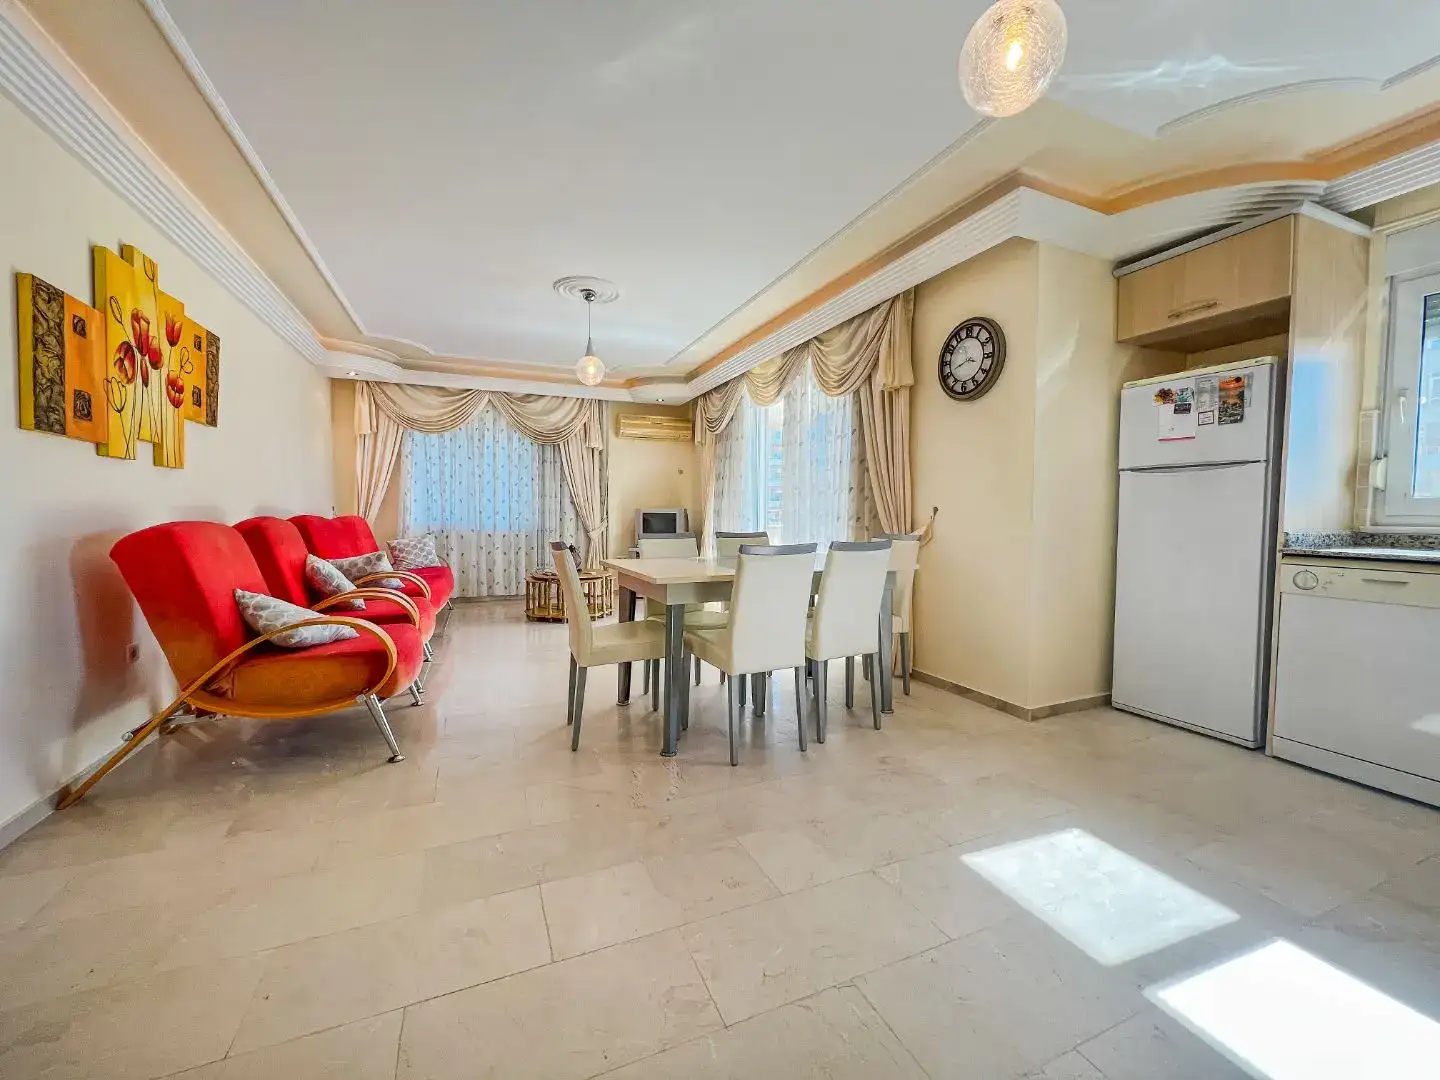 2+1 APARTMENT FOR SALE WİTHE SEA VİEW İN MAHMUTLAR-ALANYA